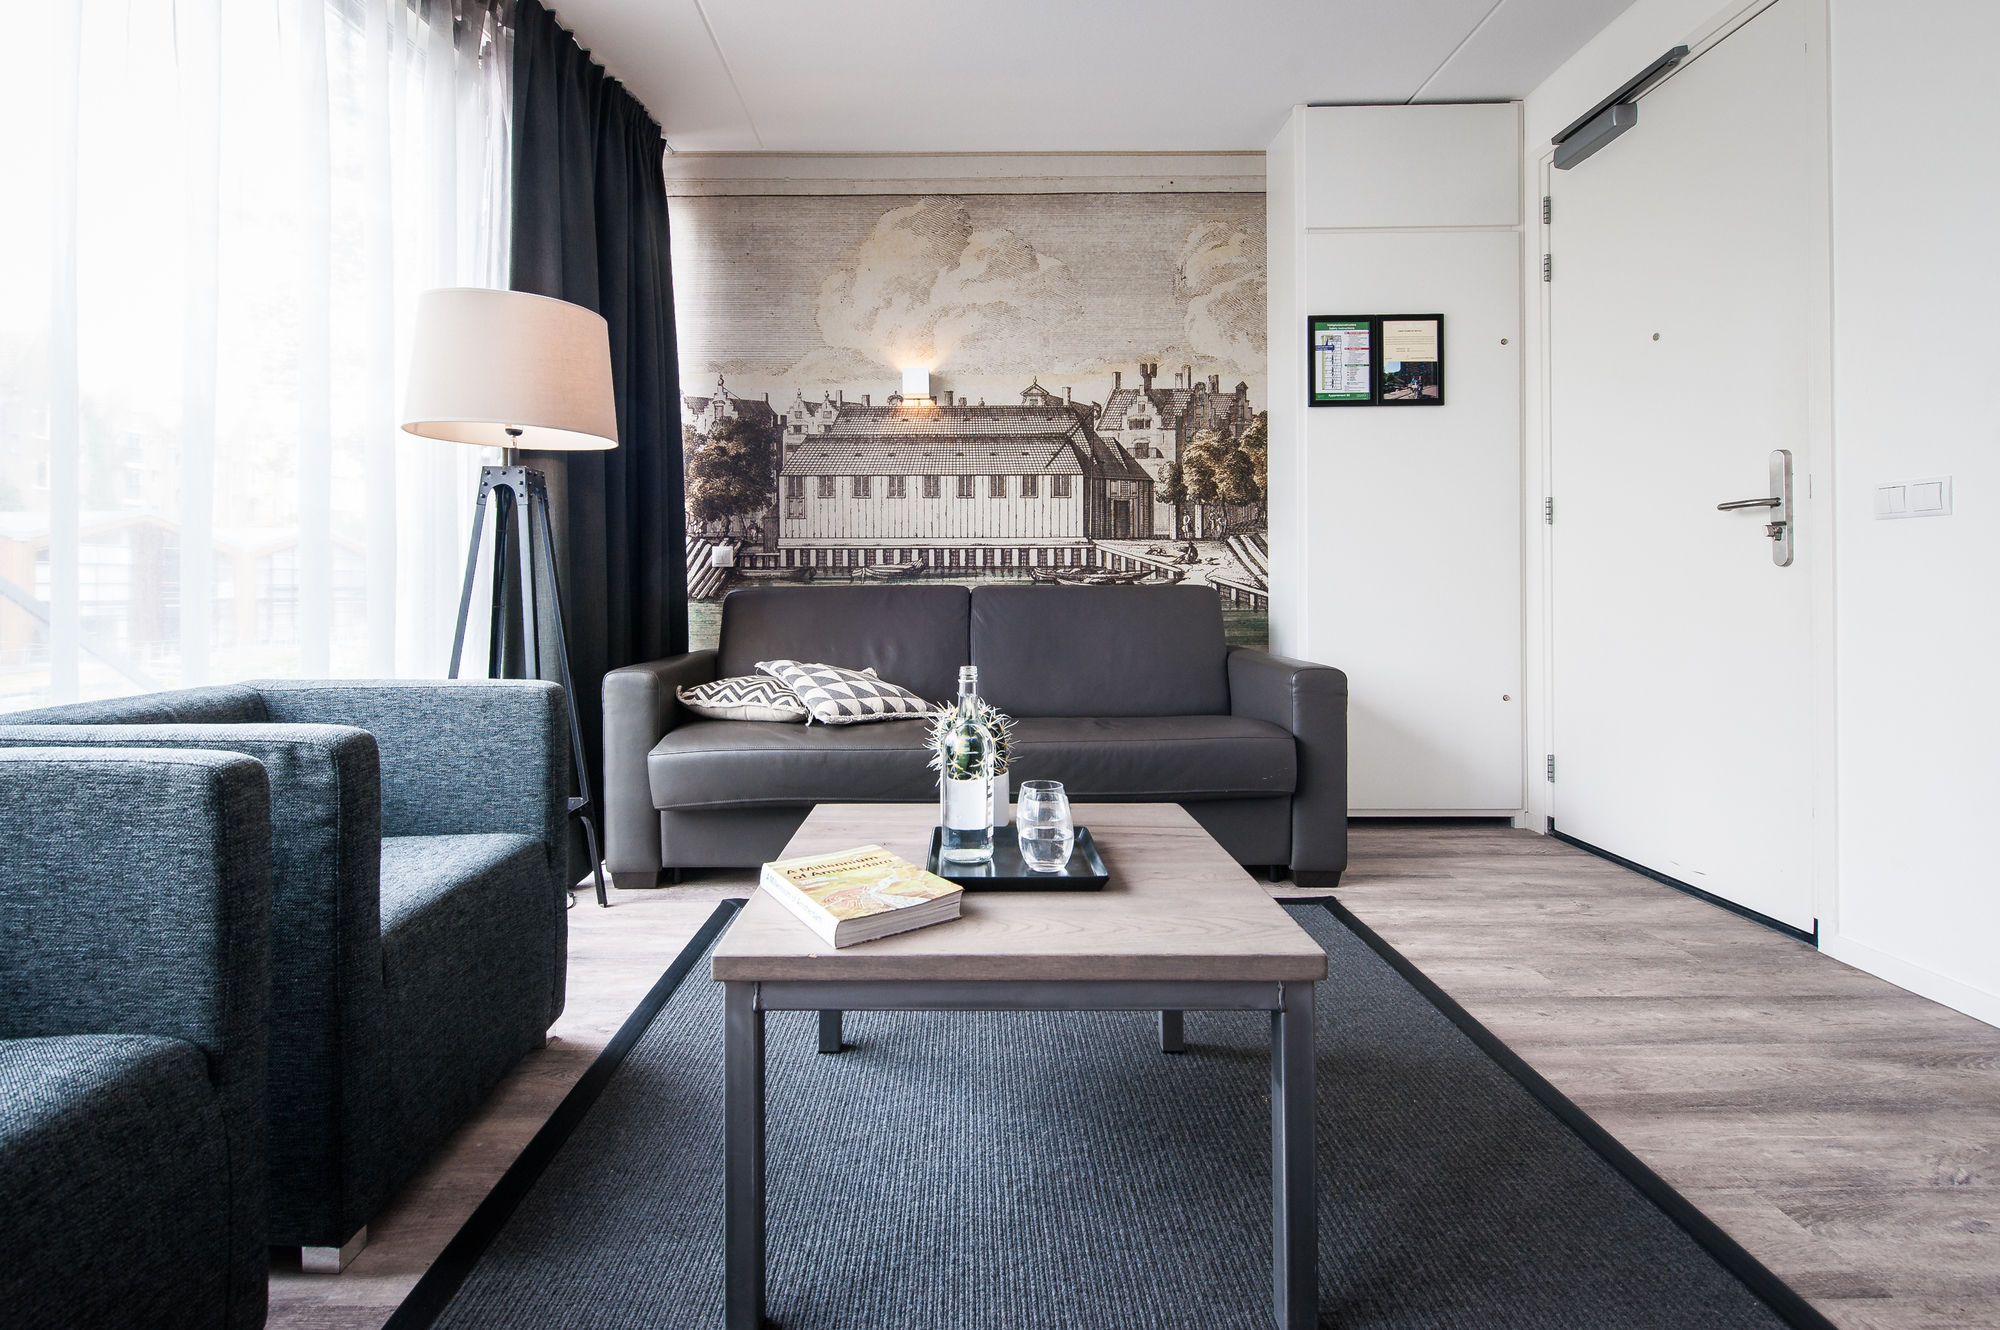 Yays Bickersgracht Concierged Boutique Apartments - Netherlands - Amsterdam